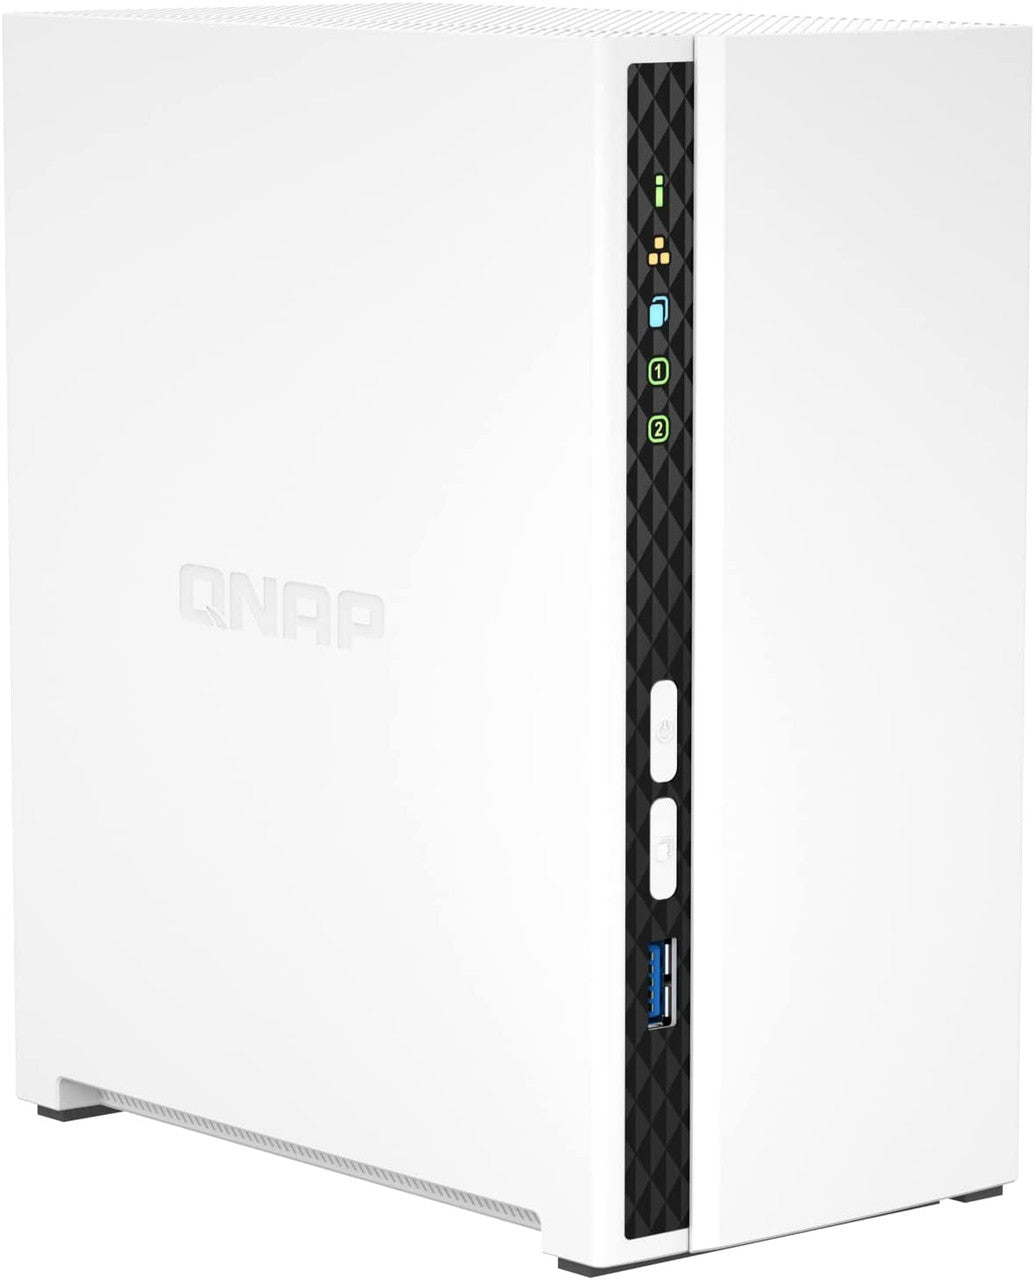 QNAP TS-233 2-Bay Desktop NAS with a 6TB (2 x 3TB) of Western Digital Red Plus Drives Fully Assembled and Tested